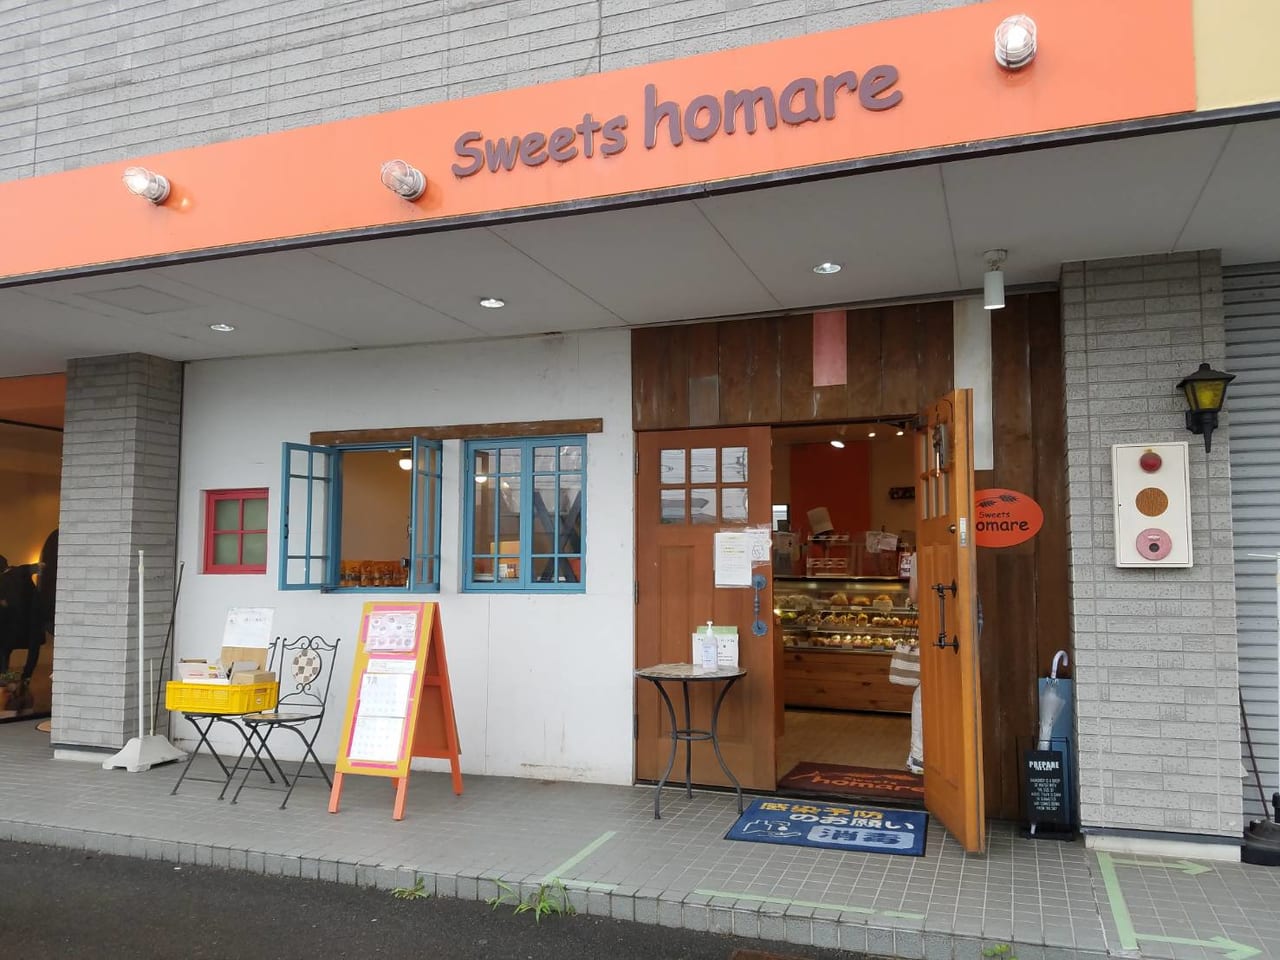 Sweets homare